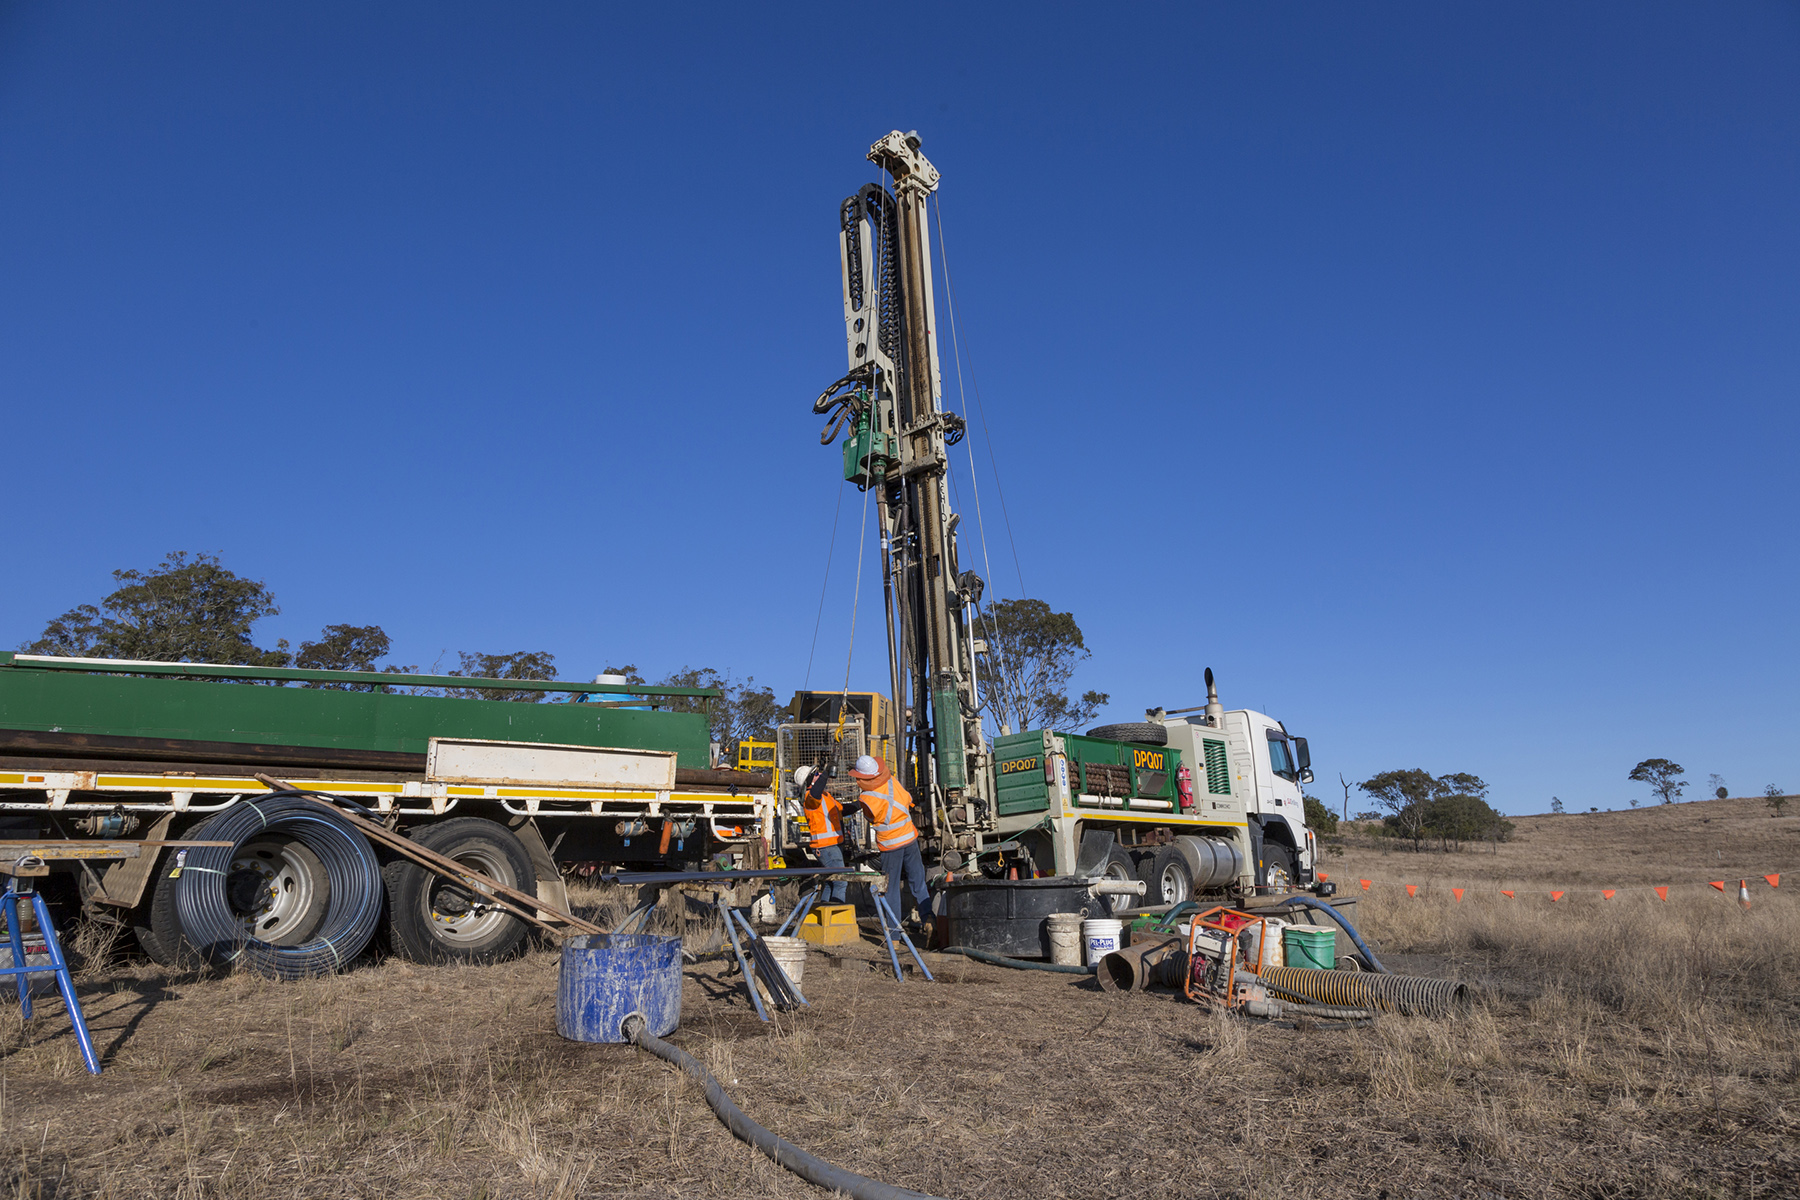 ARTC drilling site on a property owned by Teen Challenge, near Toowomba. Drill hole number is 320-01-BH2101